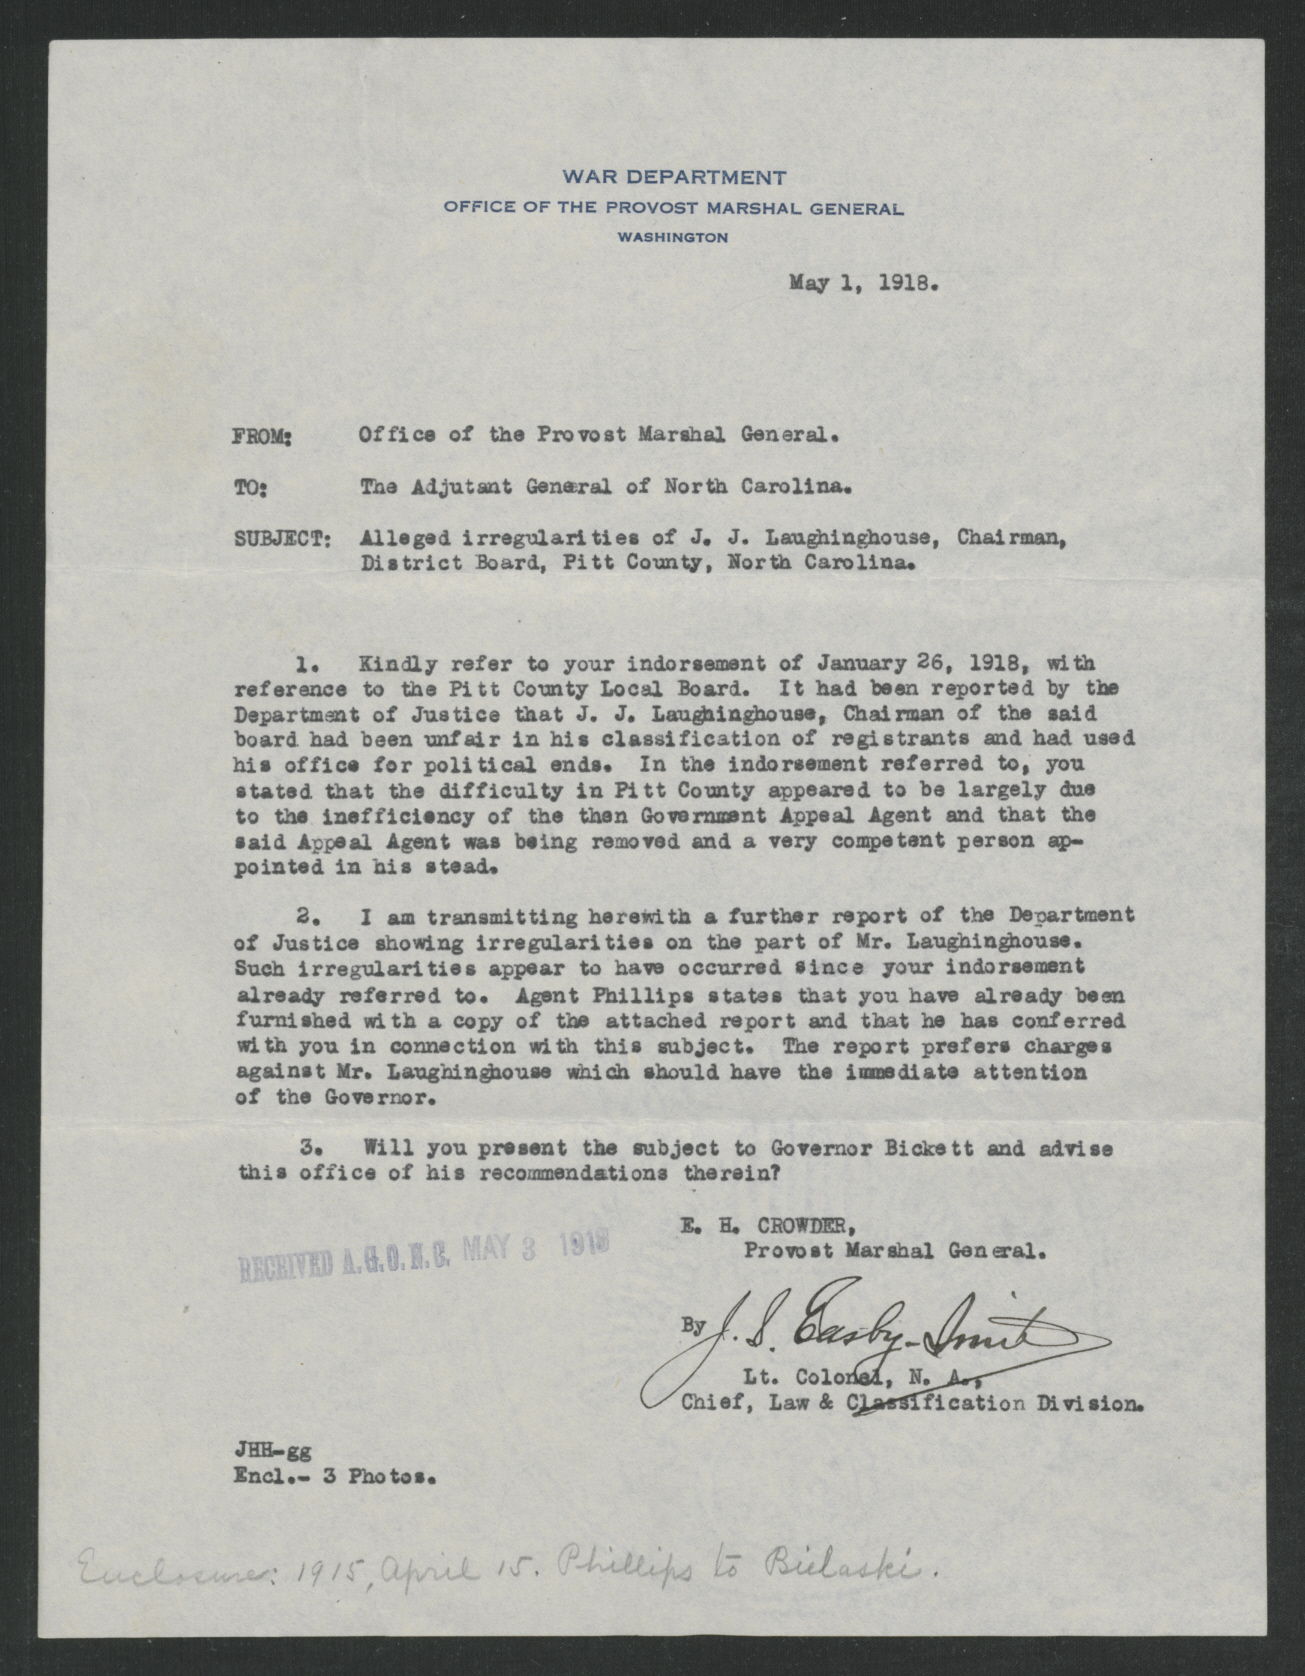 Letter from Enoch H. Crowder and James S. Easby-Smith to Laurence W. Young, May 1, 1918